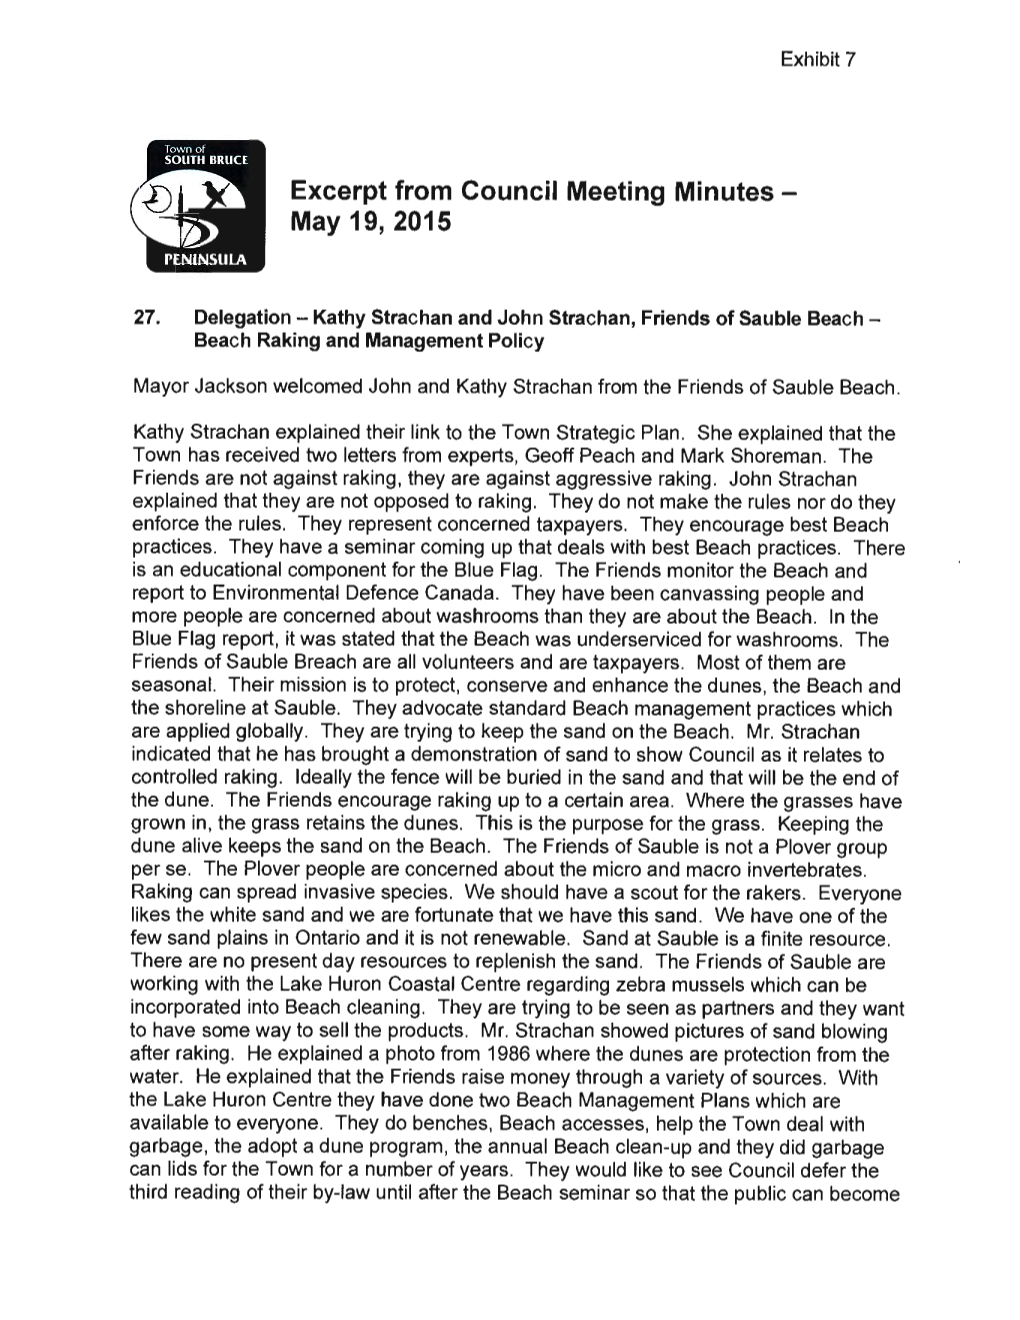 Excerpt from Council Meeting Minutes - ~ May 19, 2015 Reninsula